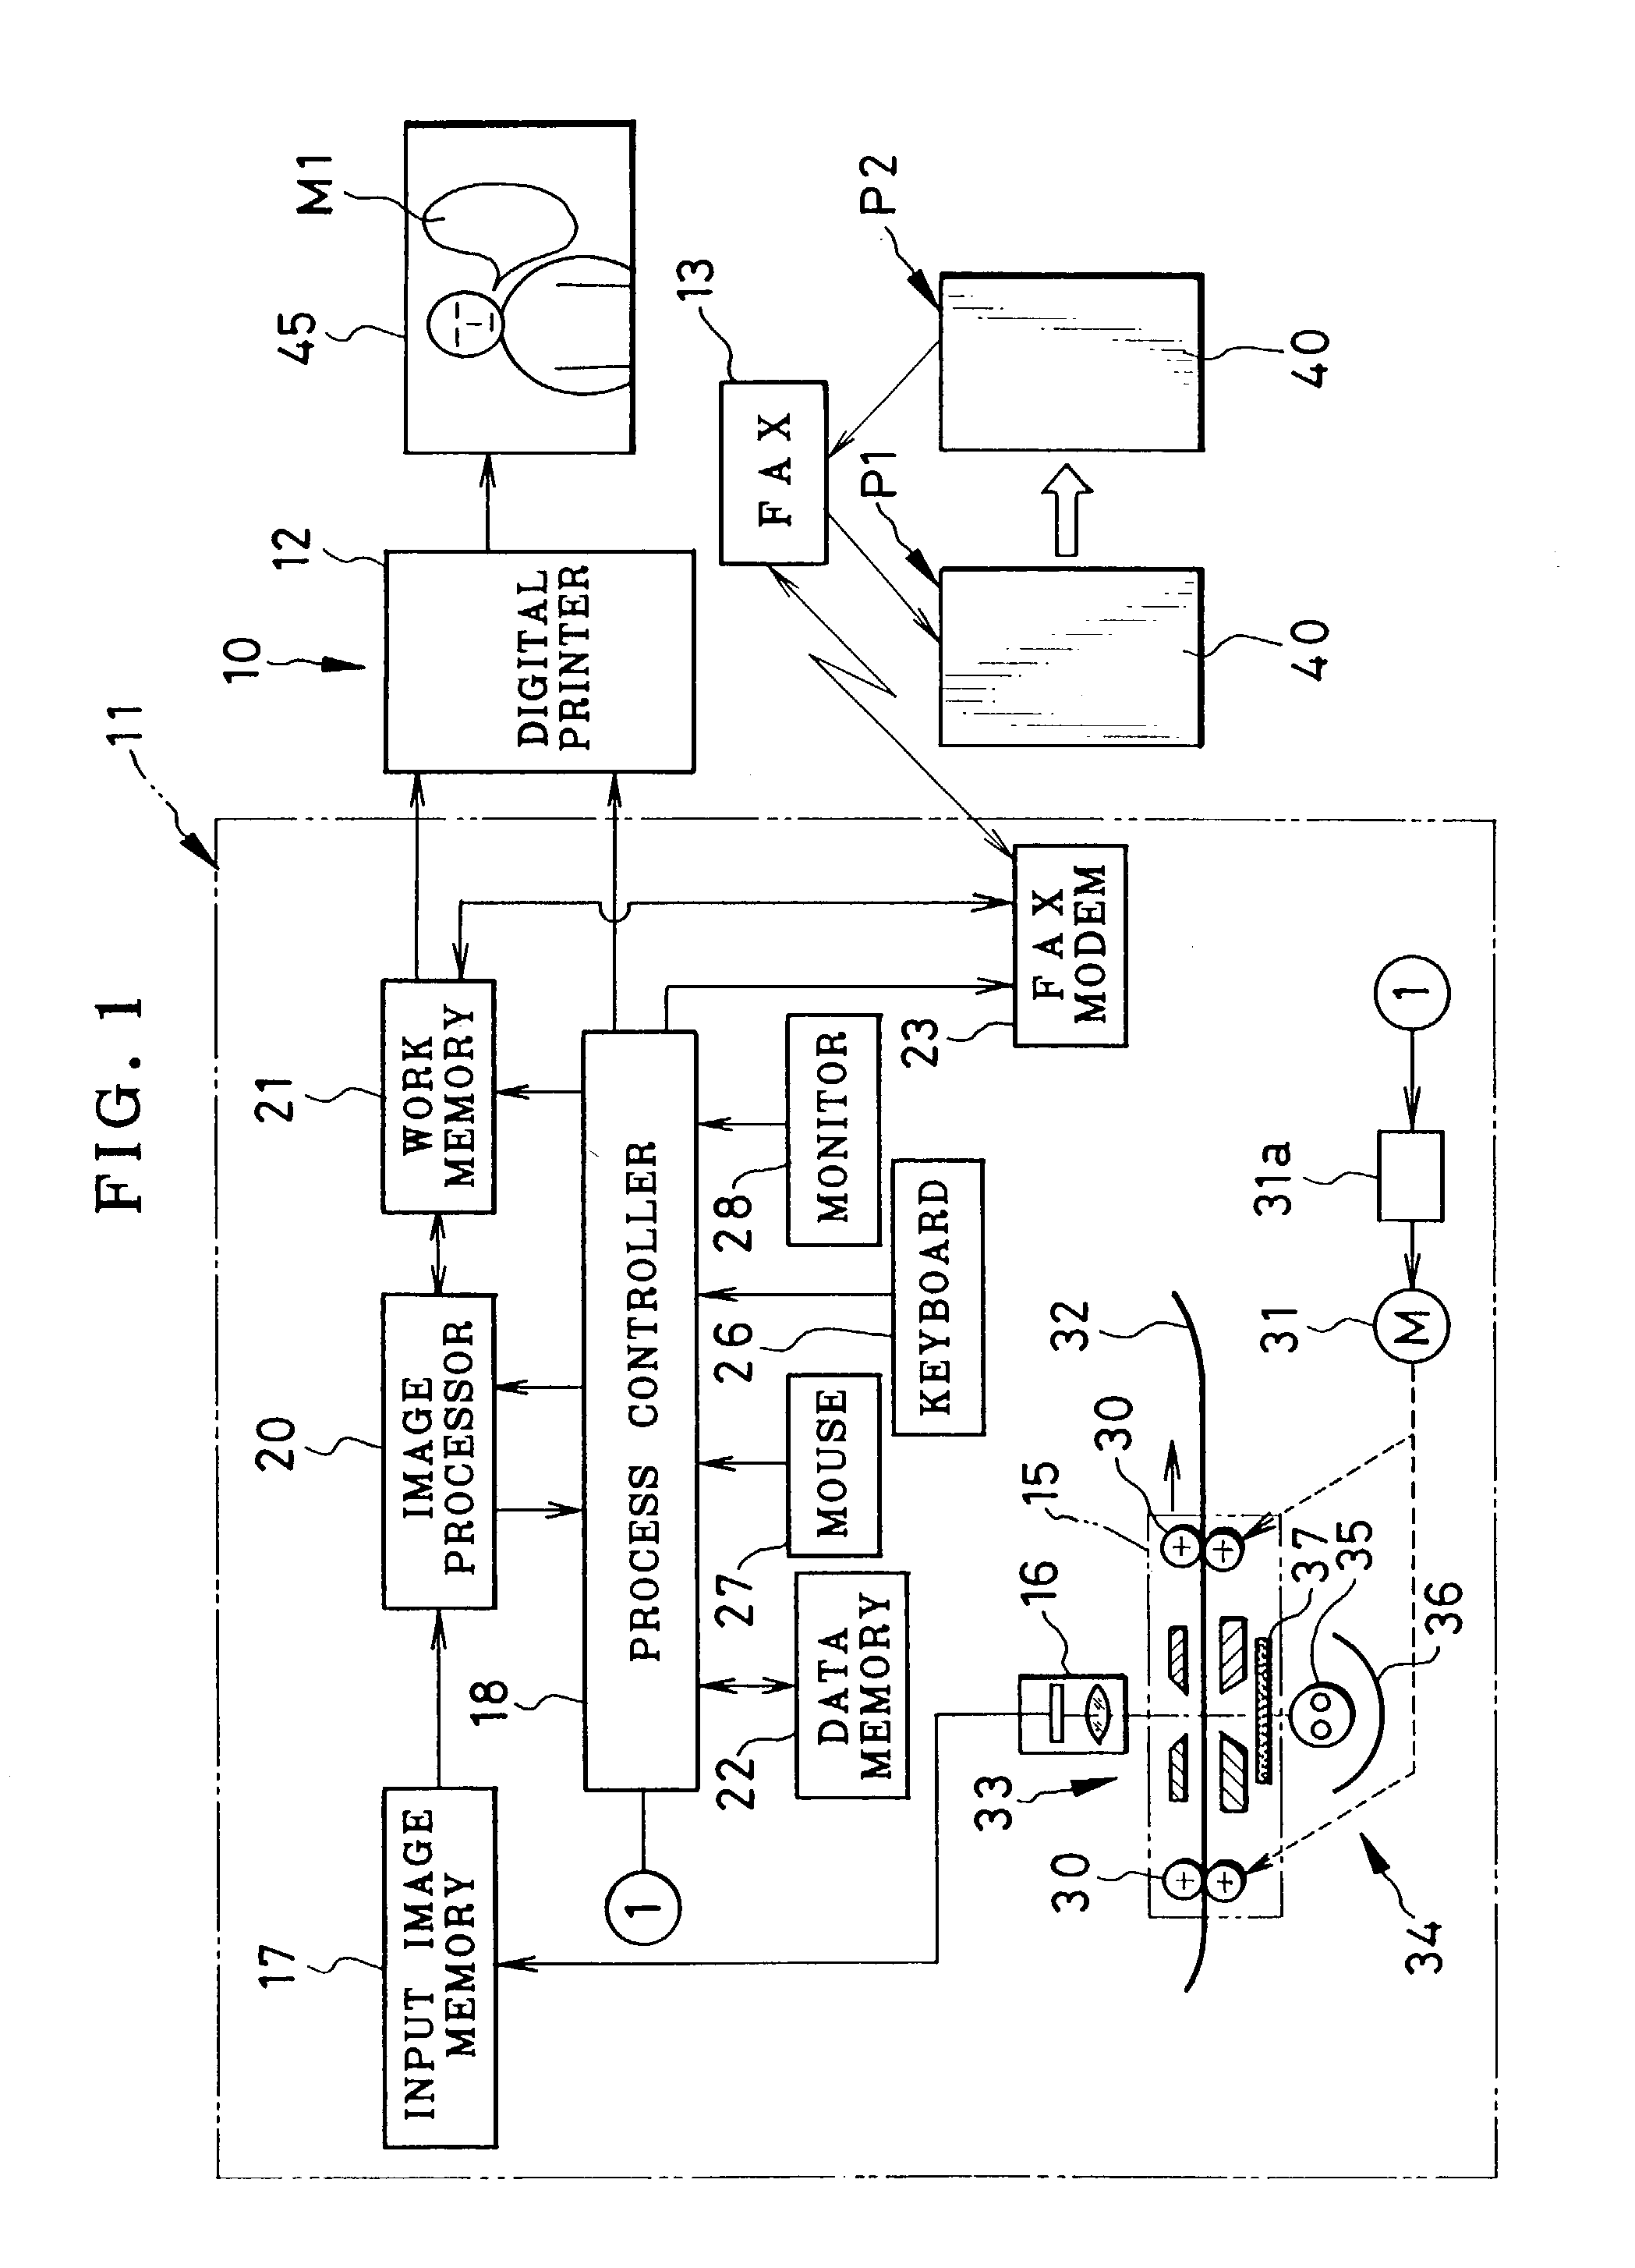 Printing method and system for making print from photo picture frame and graphic image written by user